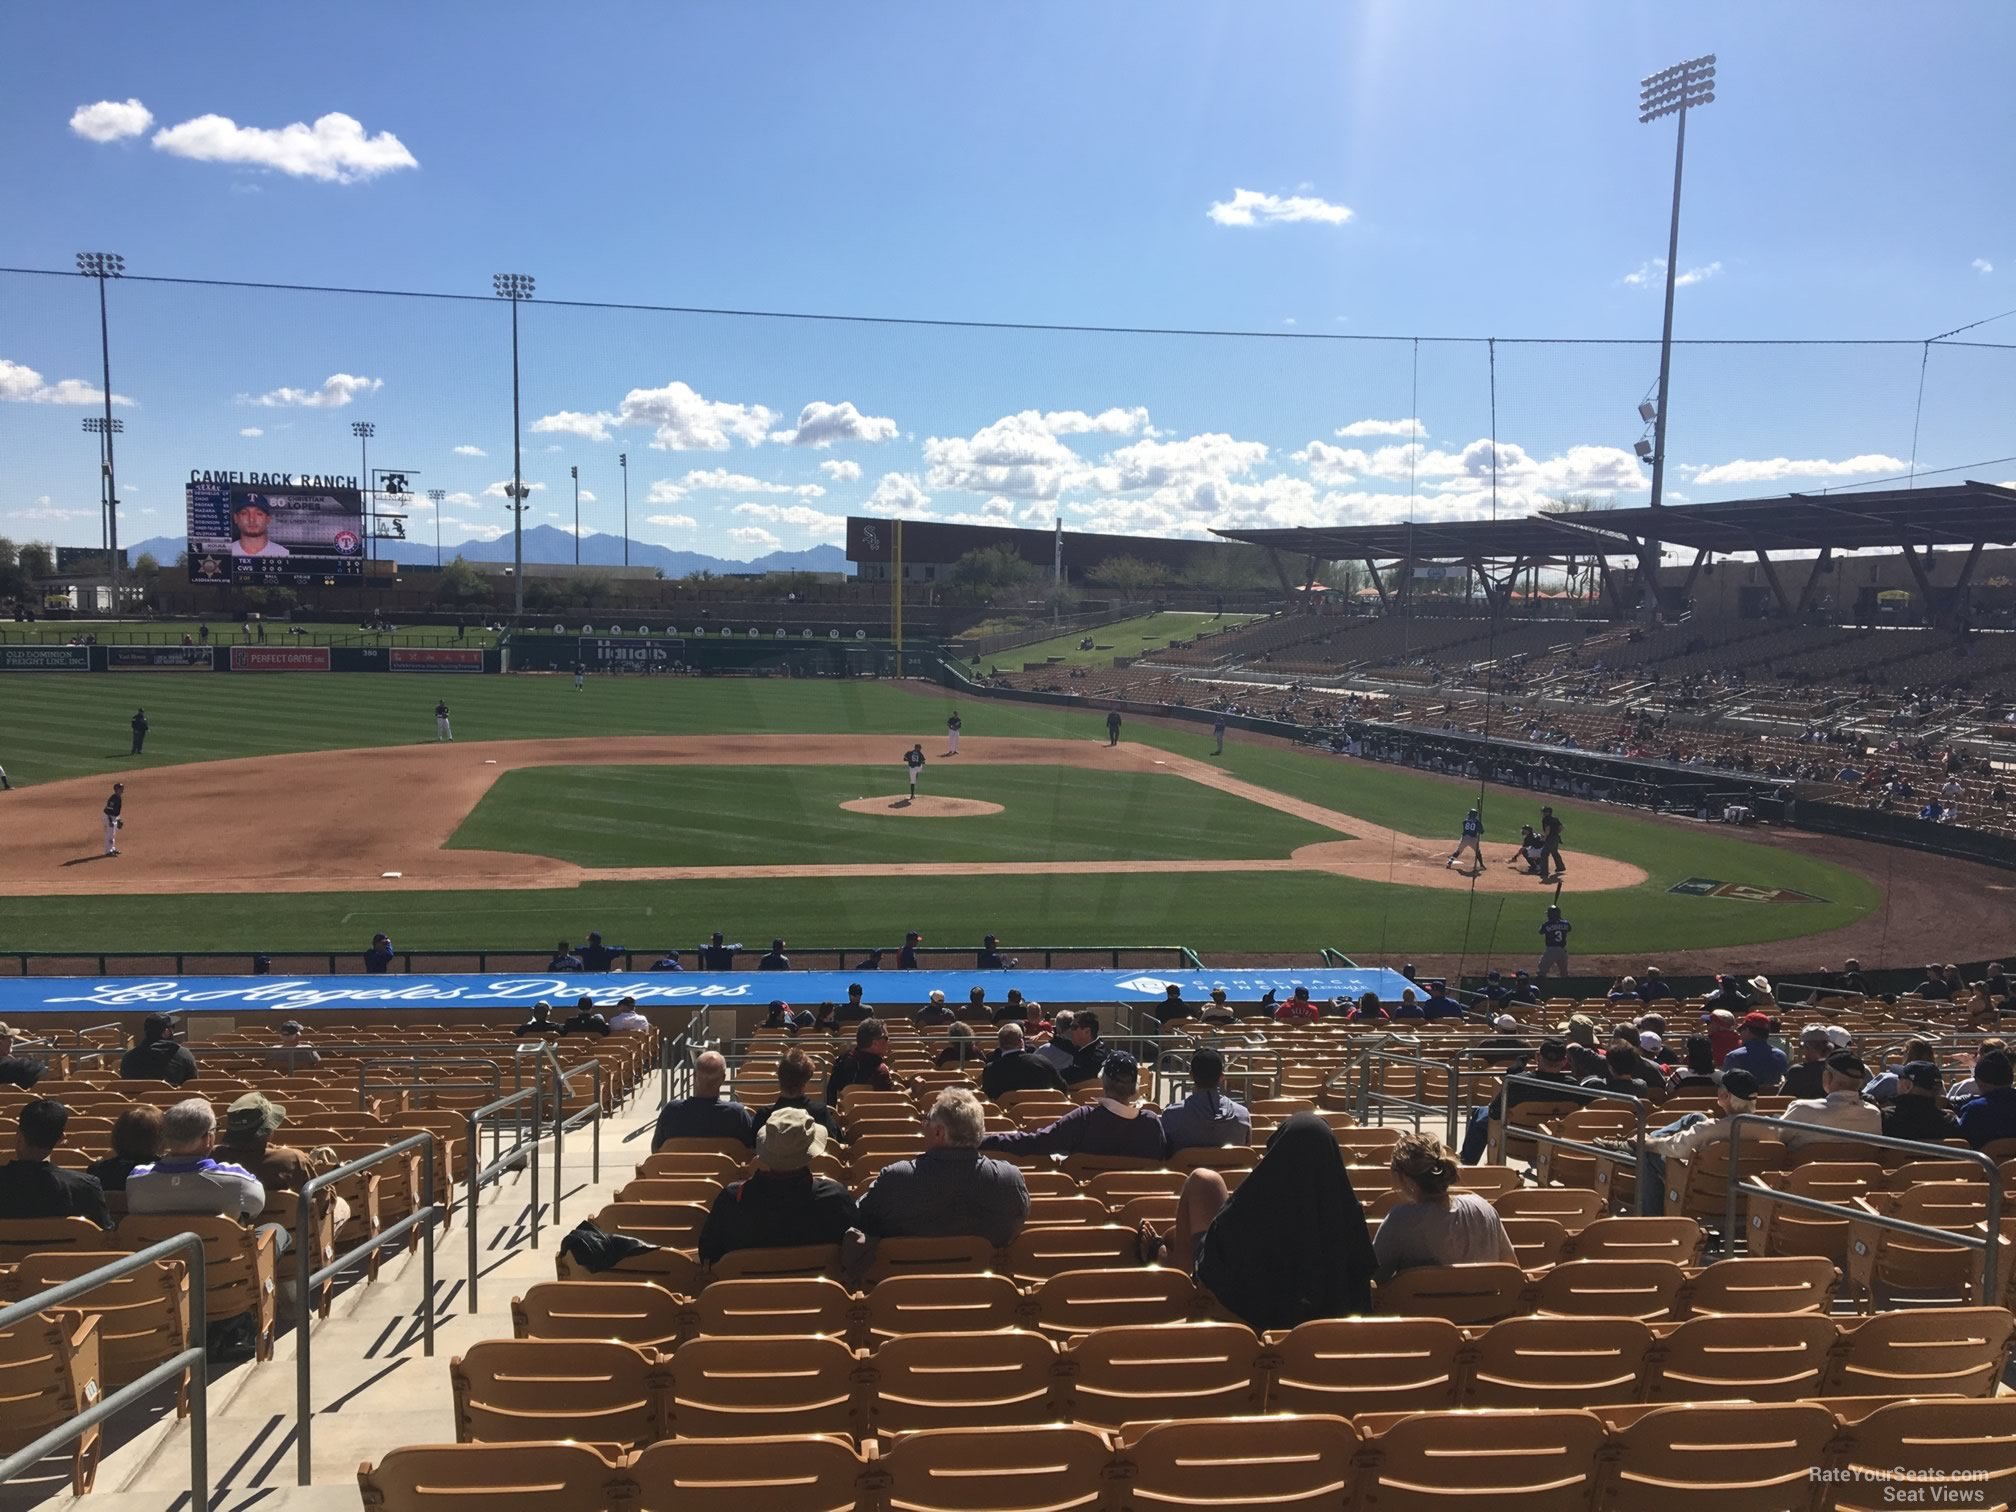 section 121, row 18 seat view  - camelback ranch